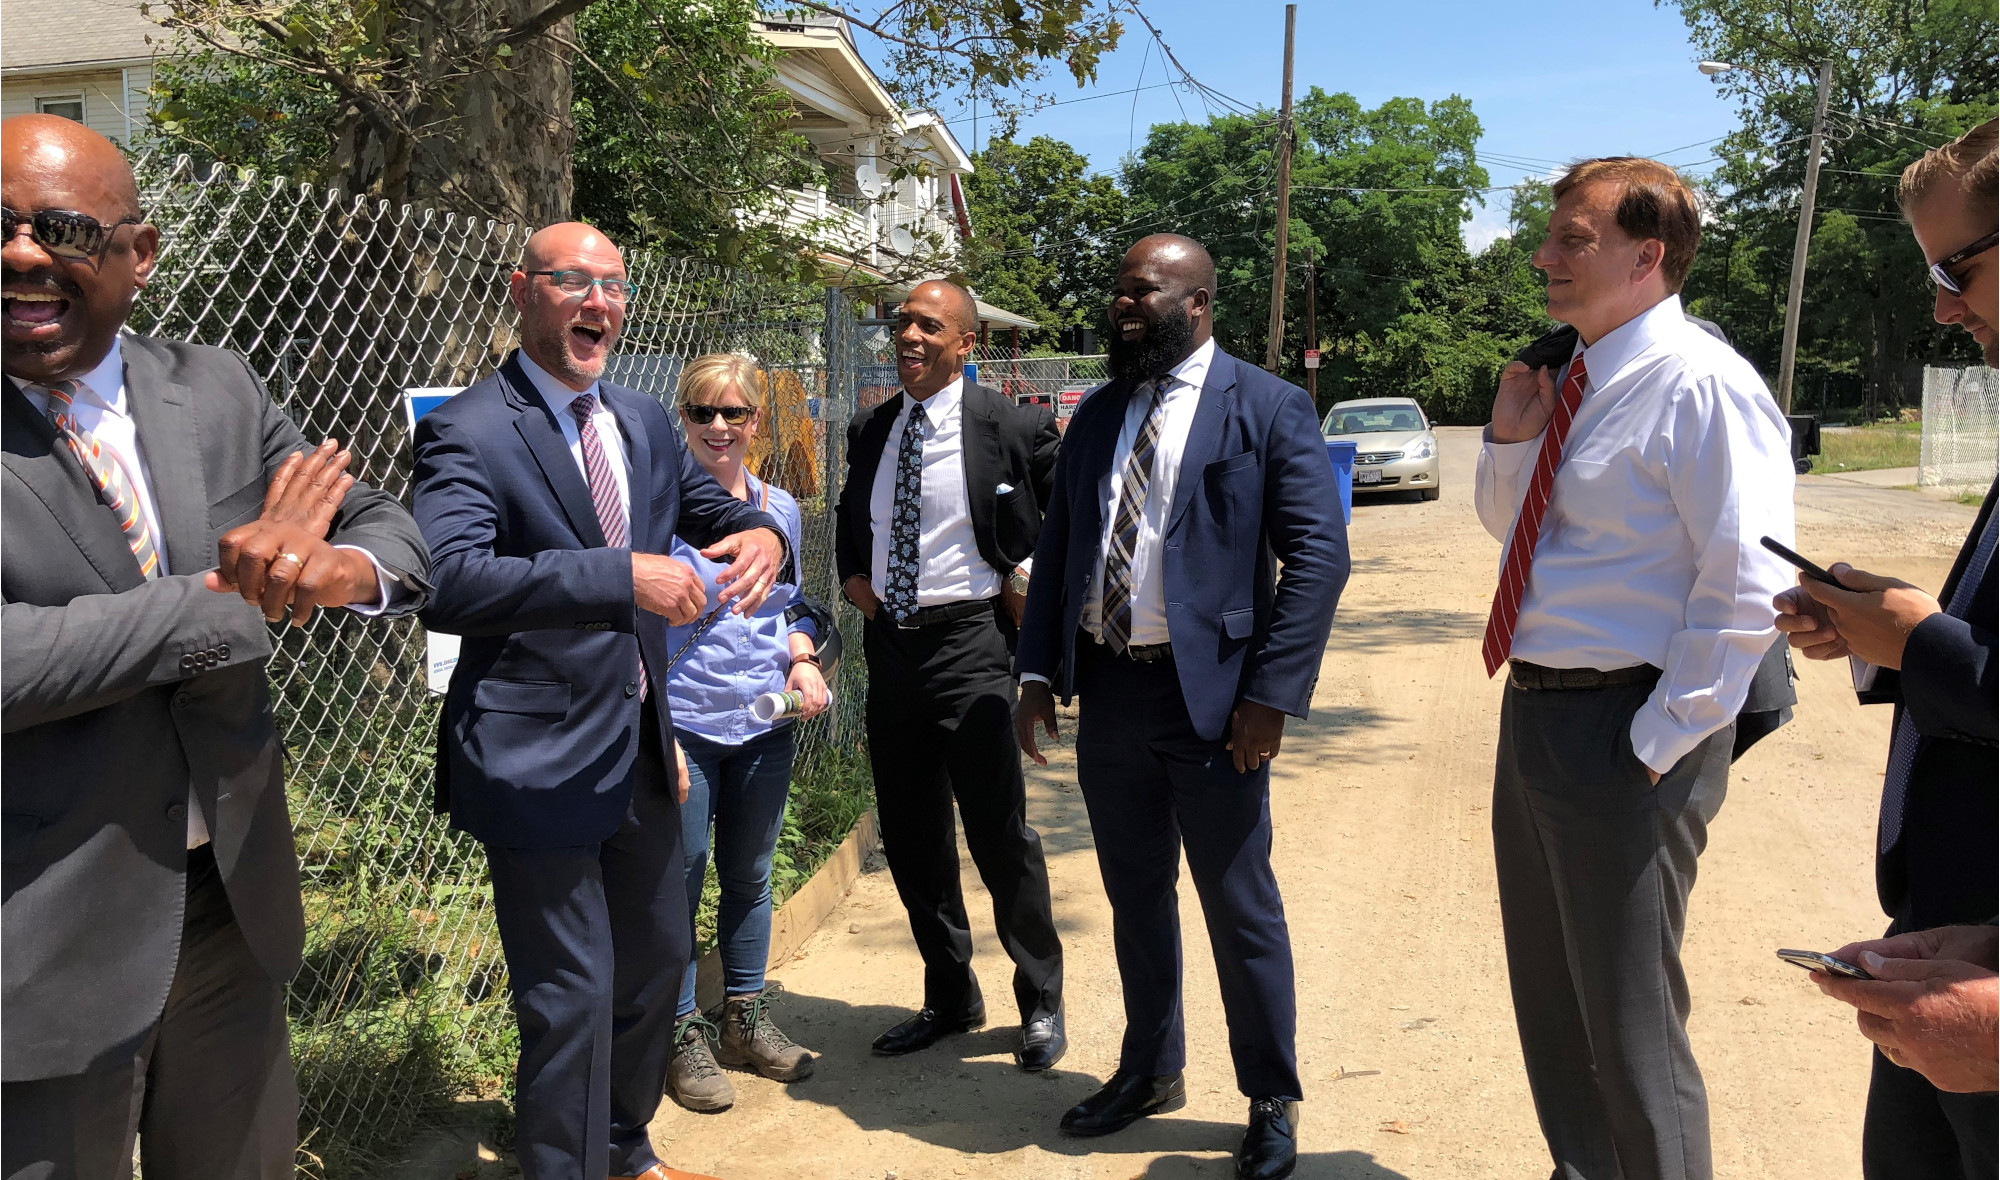 Executive Director Turner, Assistant Secretary Fleming, and Ja’Ron Smith, Deputy Assistant to the President, tour an Opportunity Zone project in Tremont, South Cleveland, OH